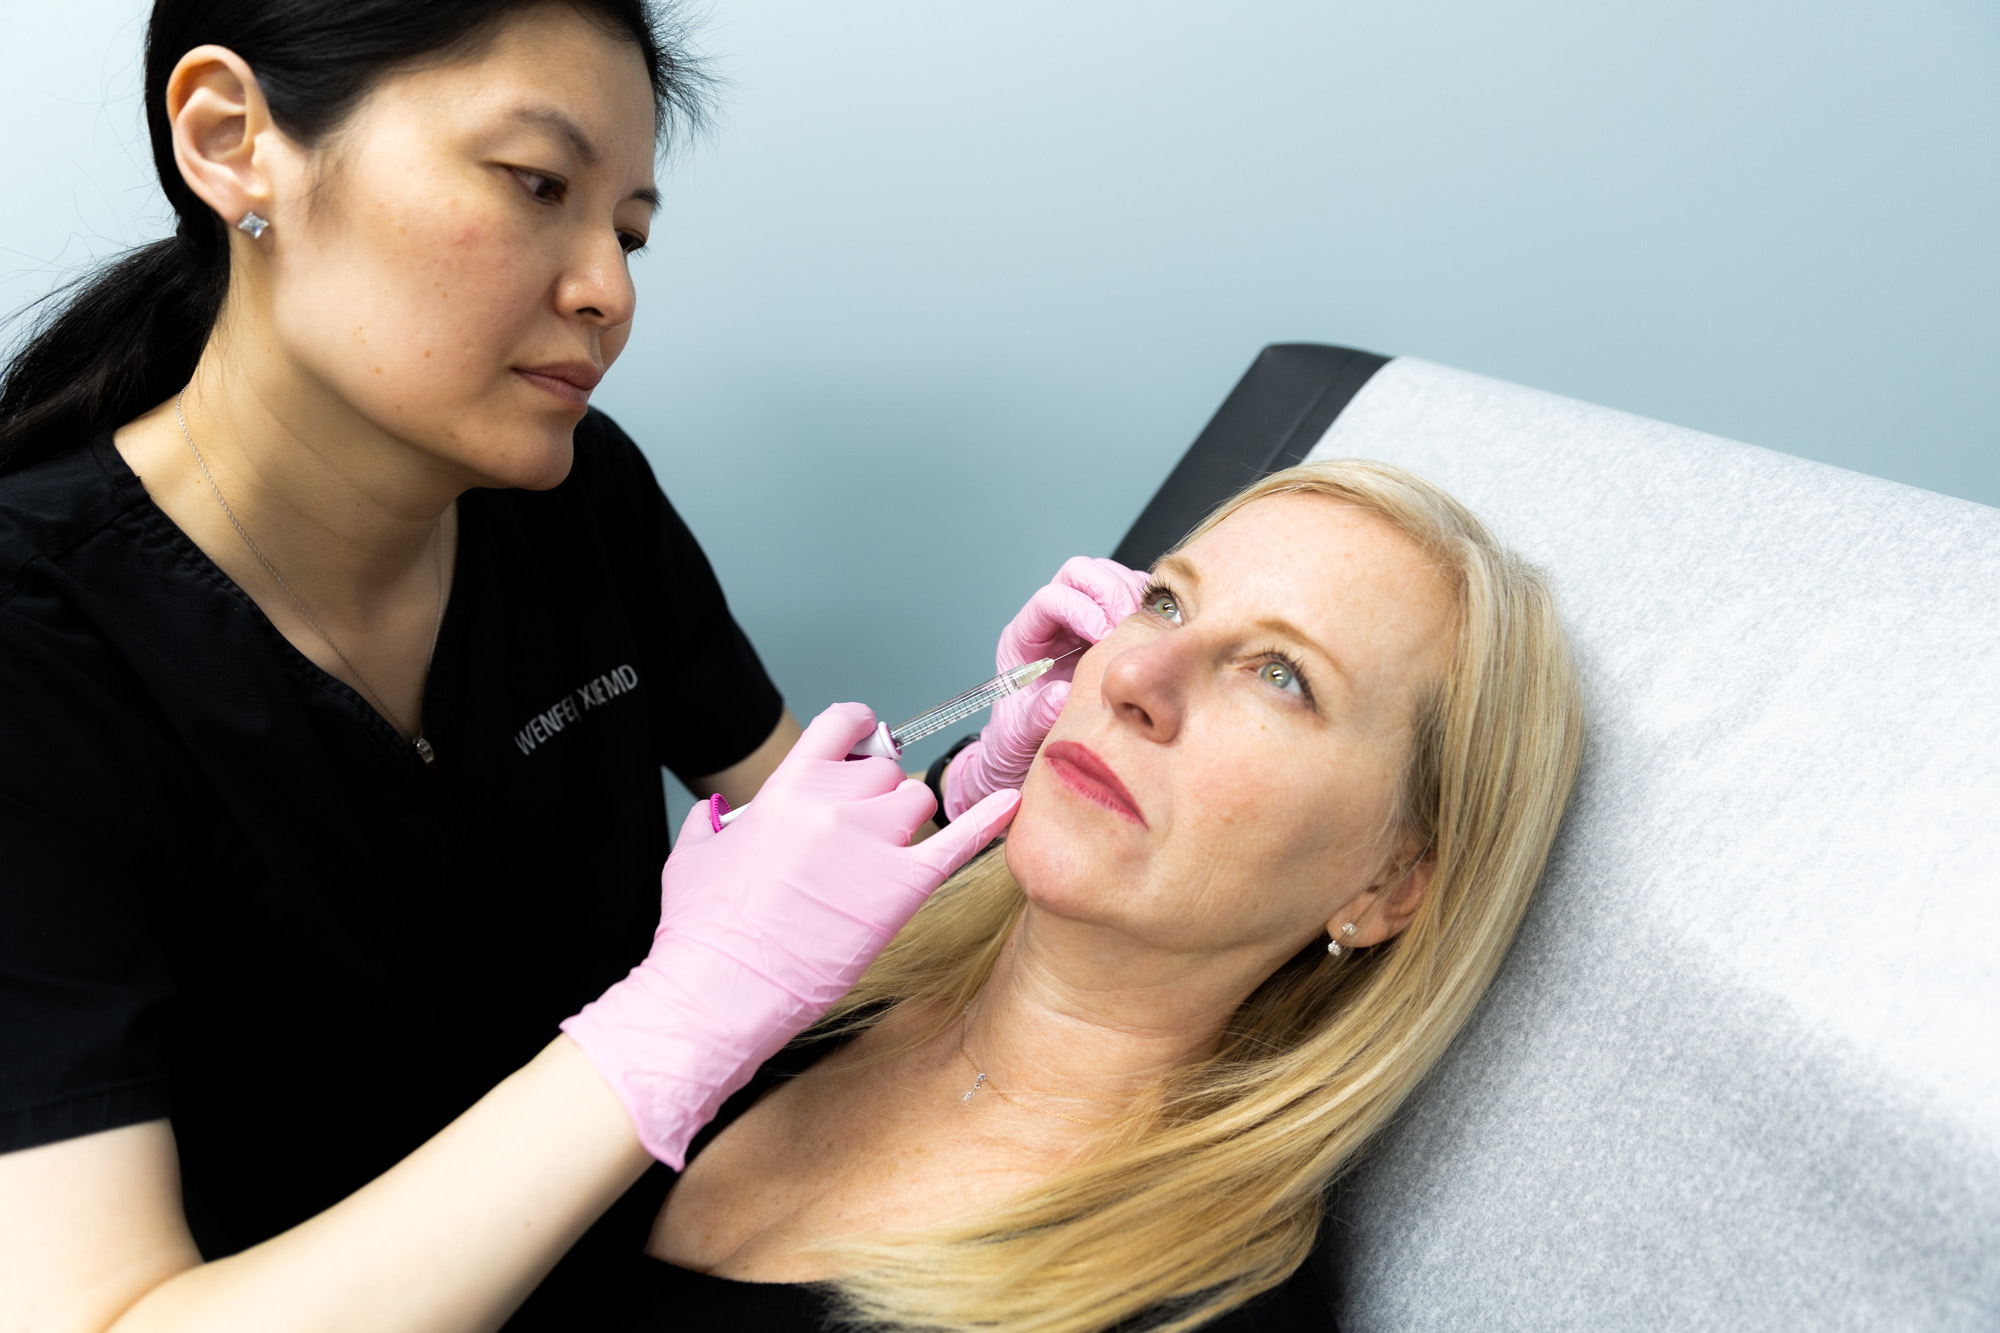 A Kansas City Skin and Cancer Center doctor injects a filler into a patient's right cheek, below her eye. The doctor uses a syringe with a needle.